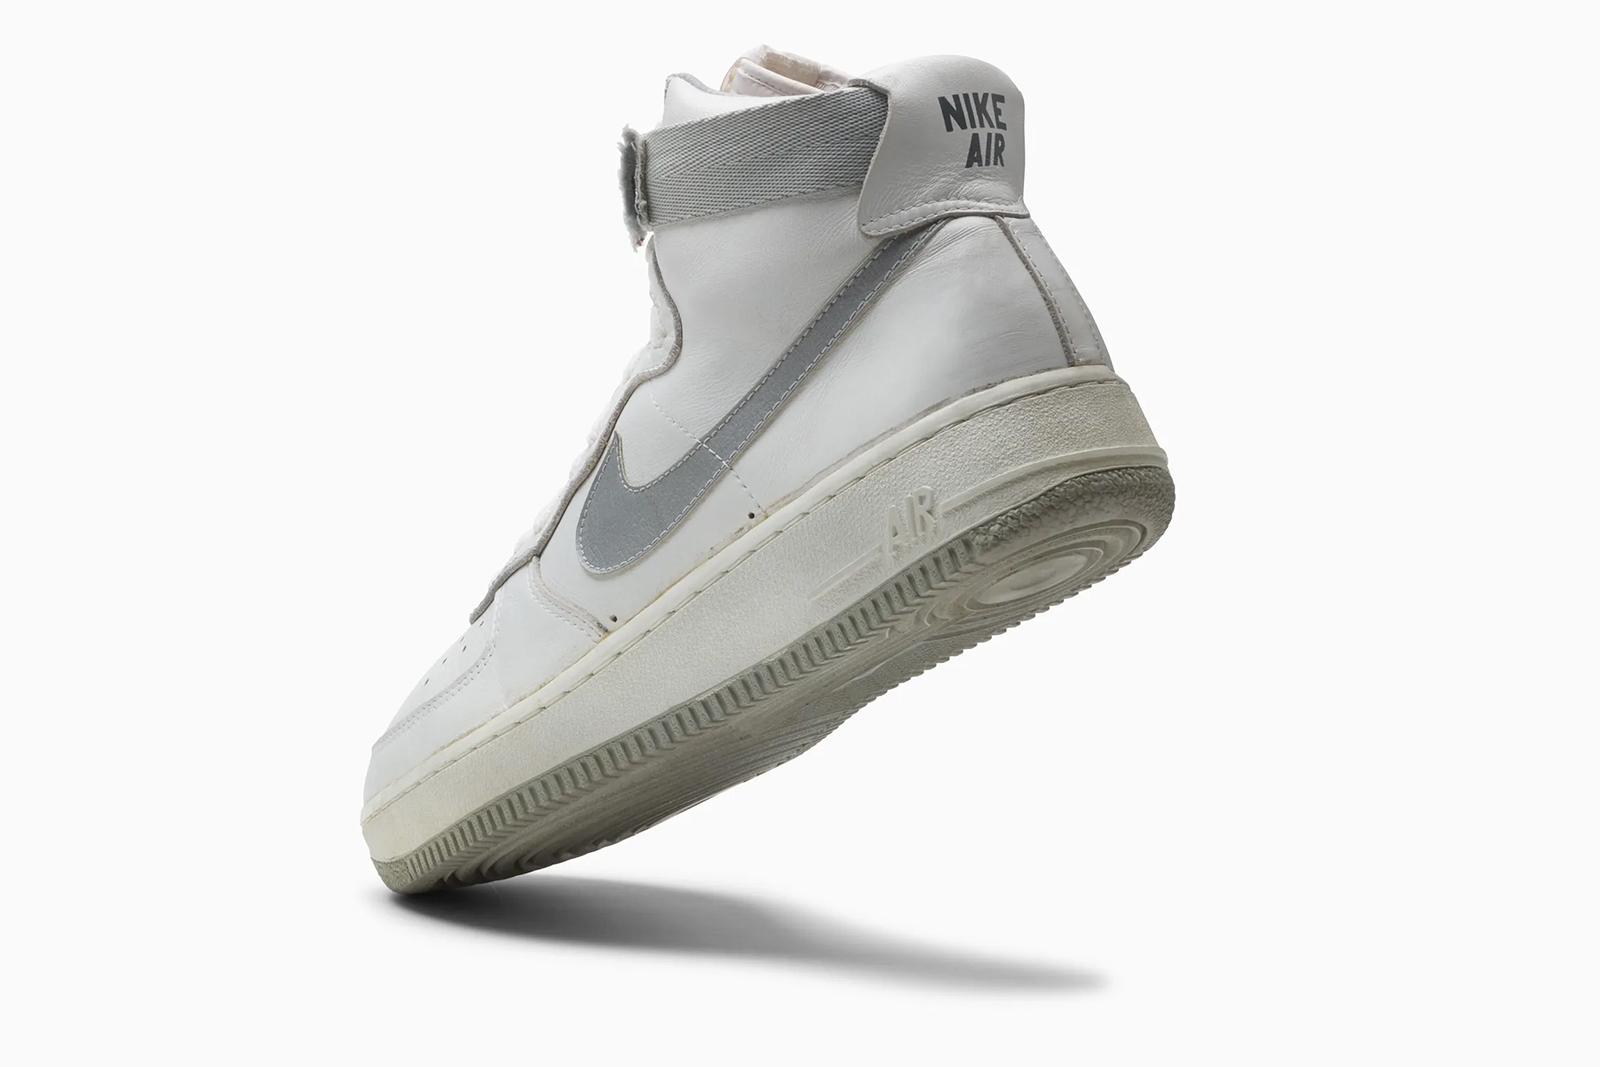 Nike has an Air Force 1 sneaker that's perfect for your grandpa